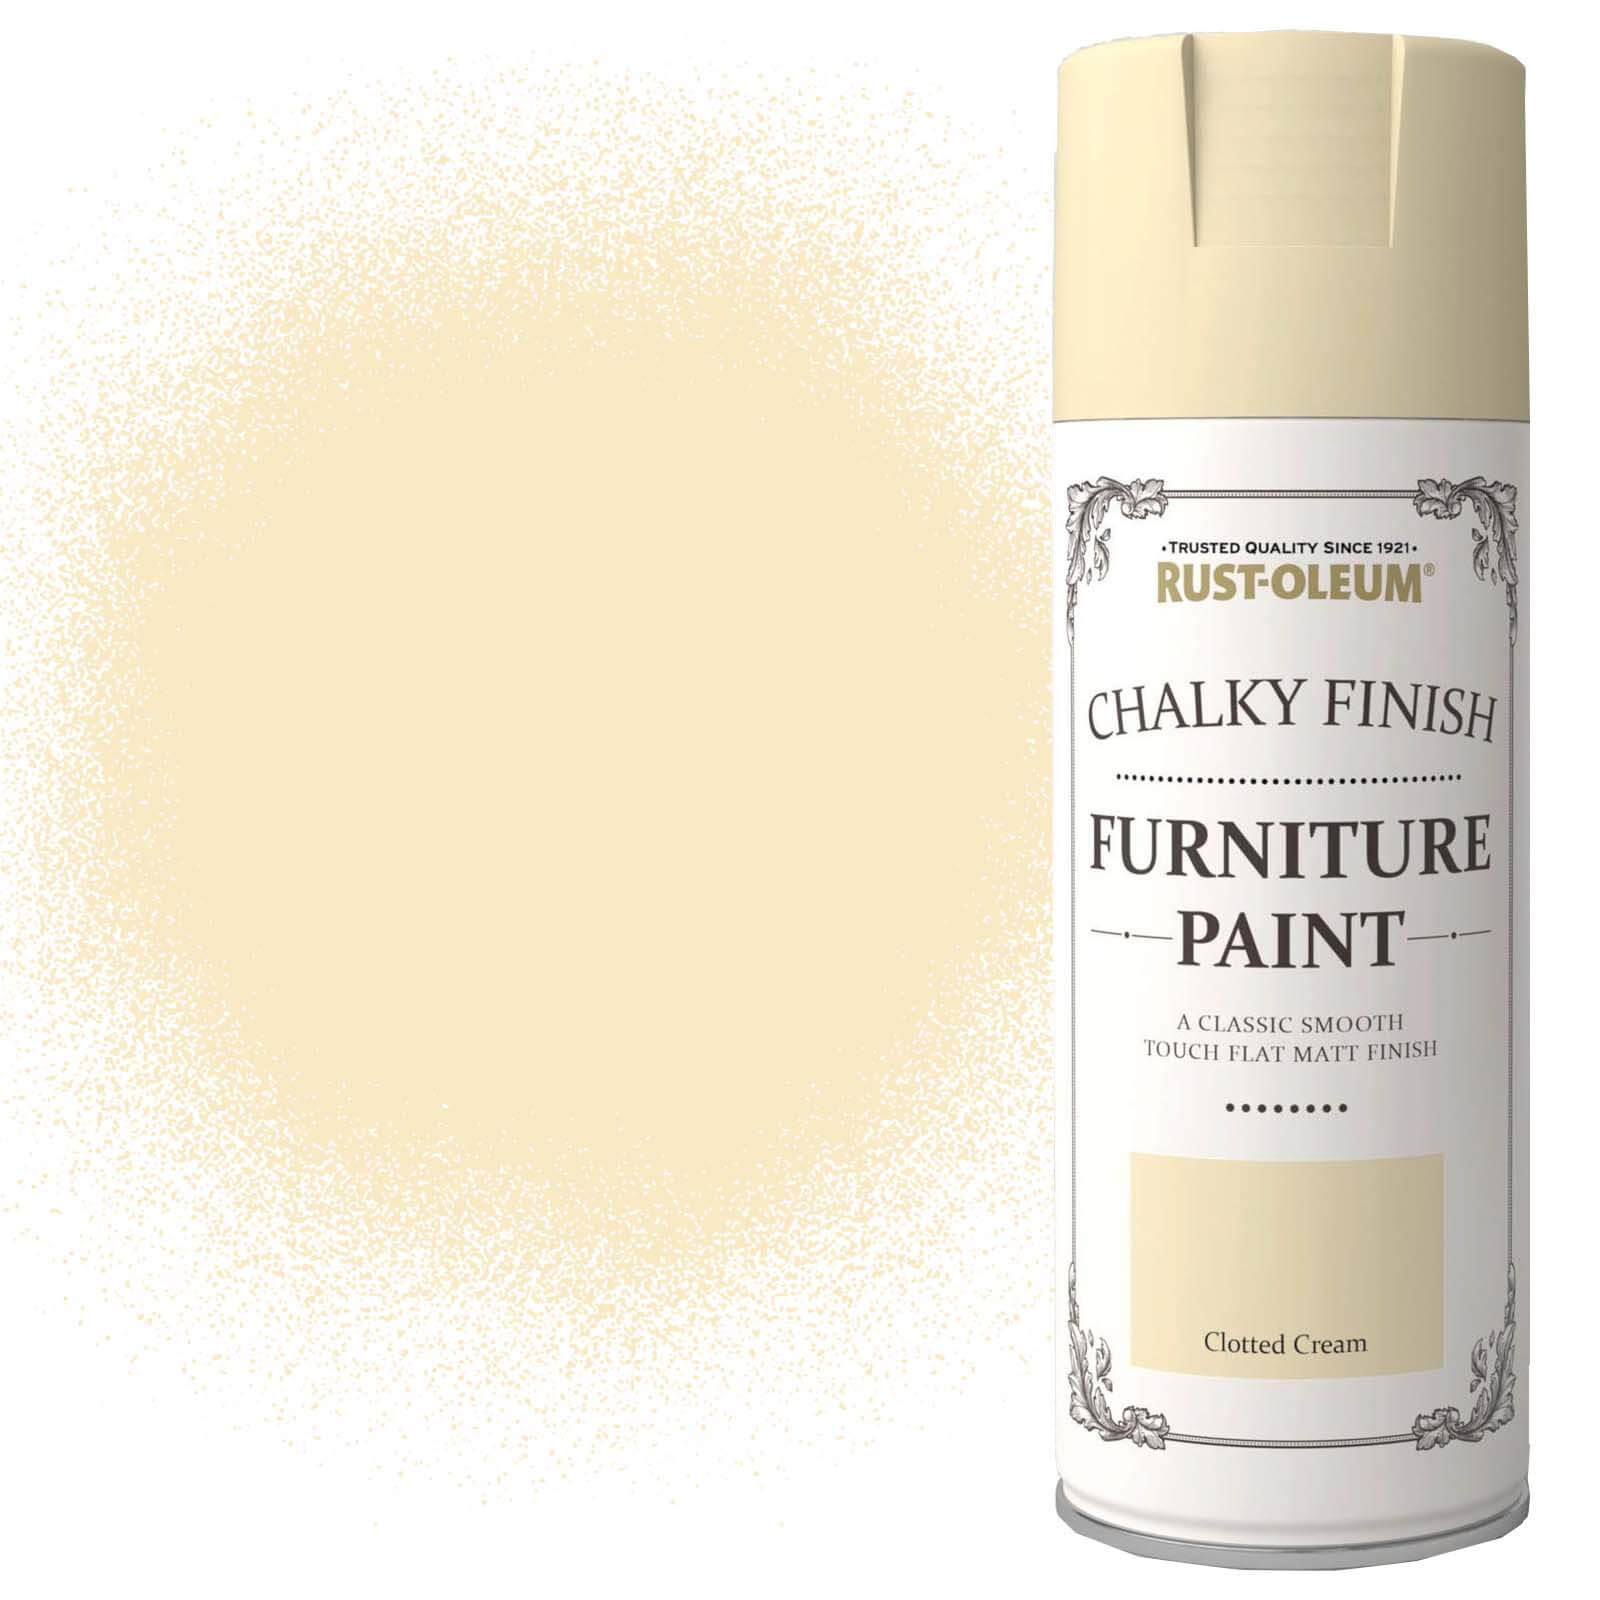 Rust-Oleum Chalky Finish Furniture Spray Paint Clotted Cream - 400ml